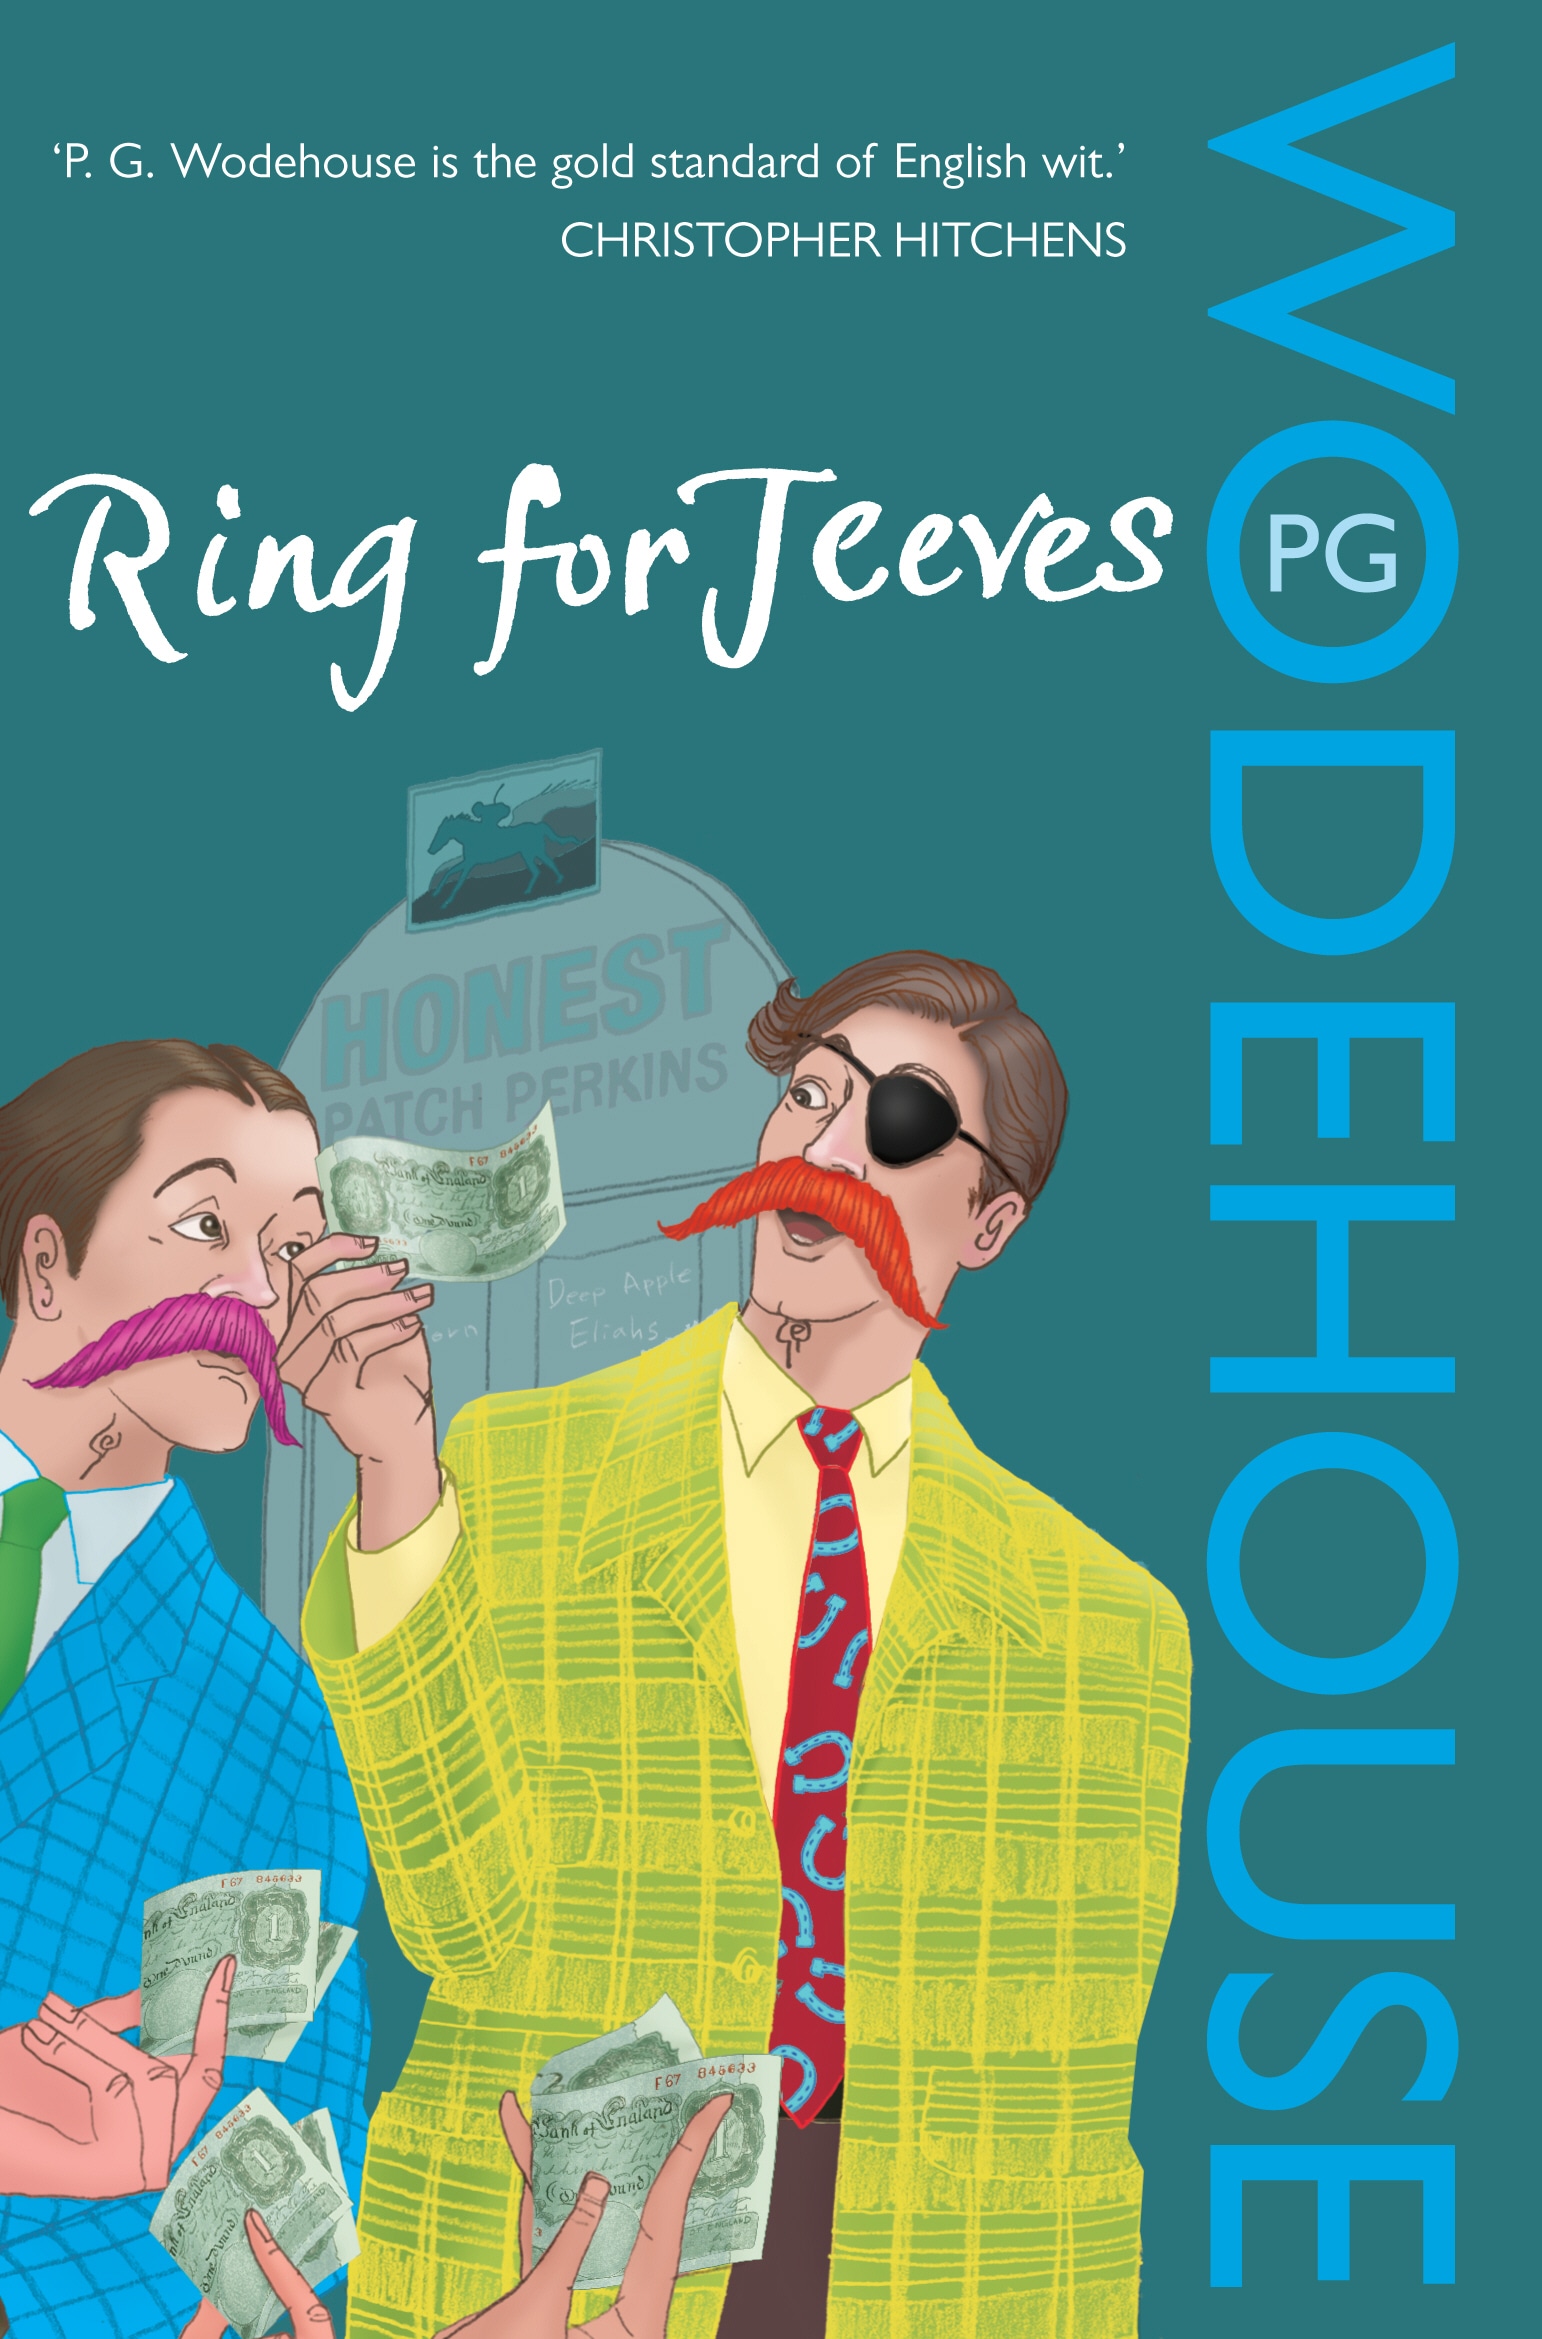 Book “Ring for Jeeves” by P.G. Wodehouse — August 7, 2008